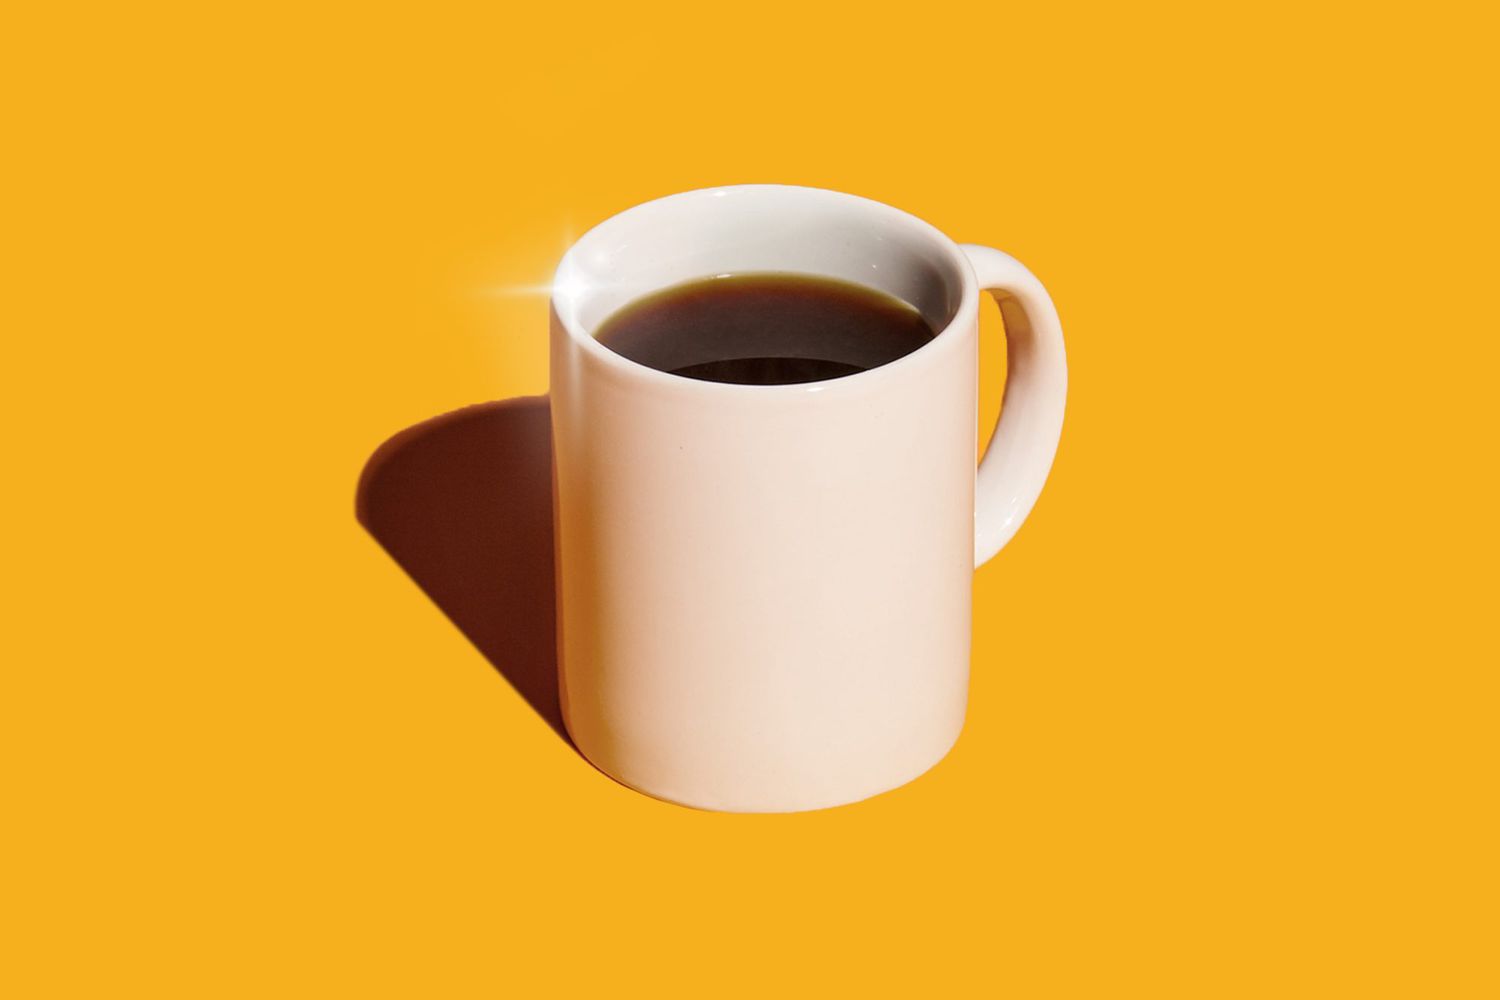 Cup of coffee sparkling in hard light against an orange background